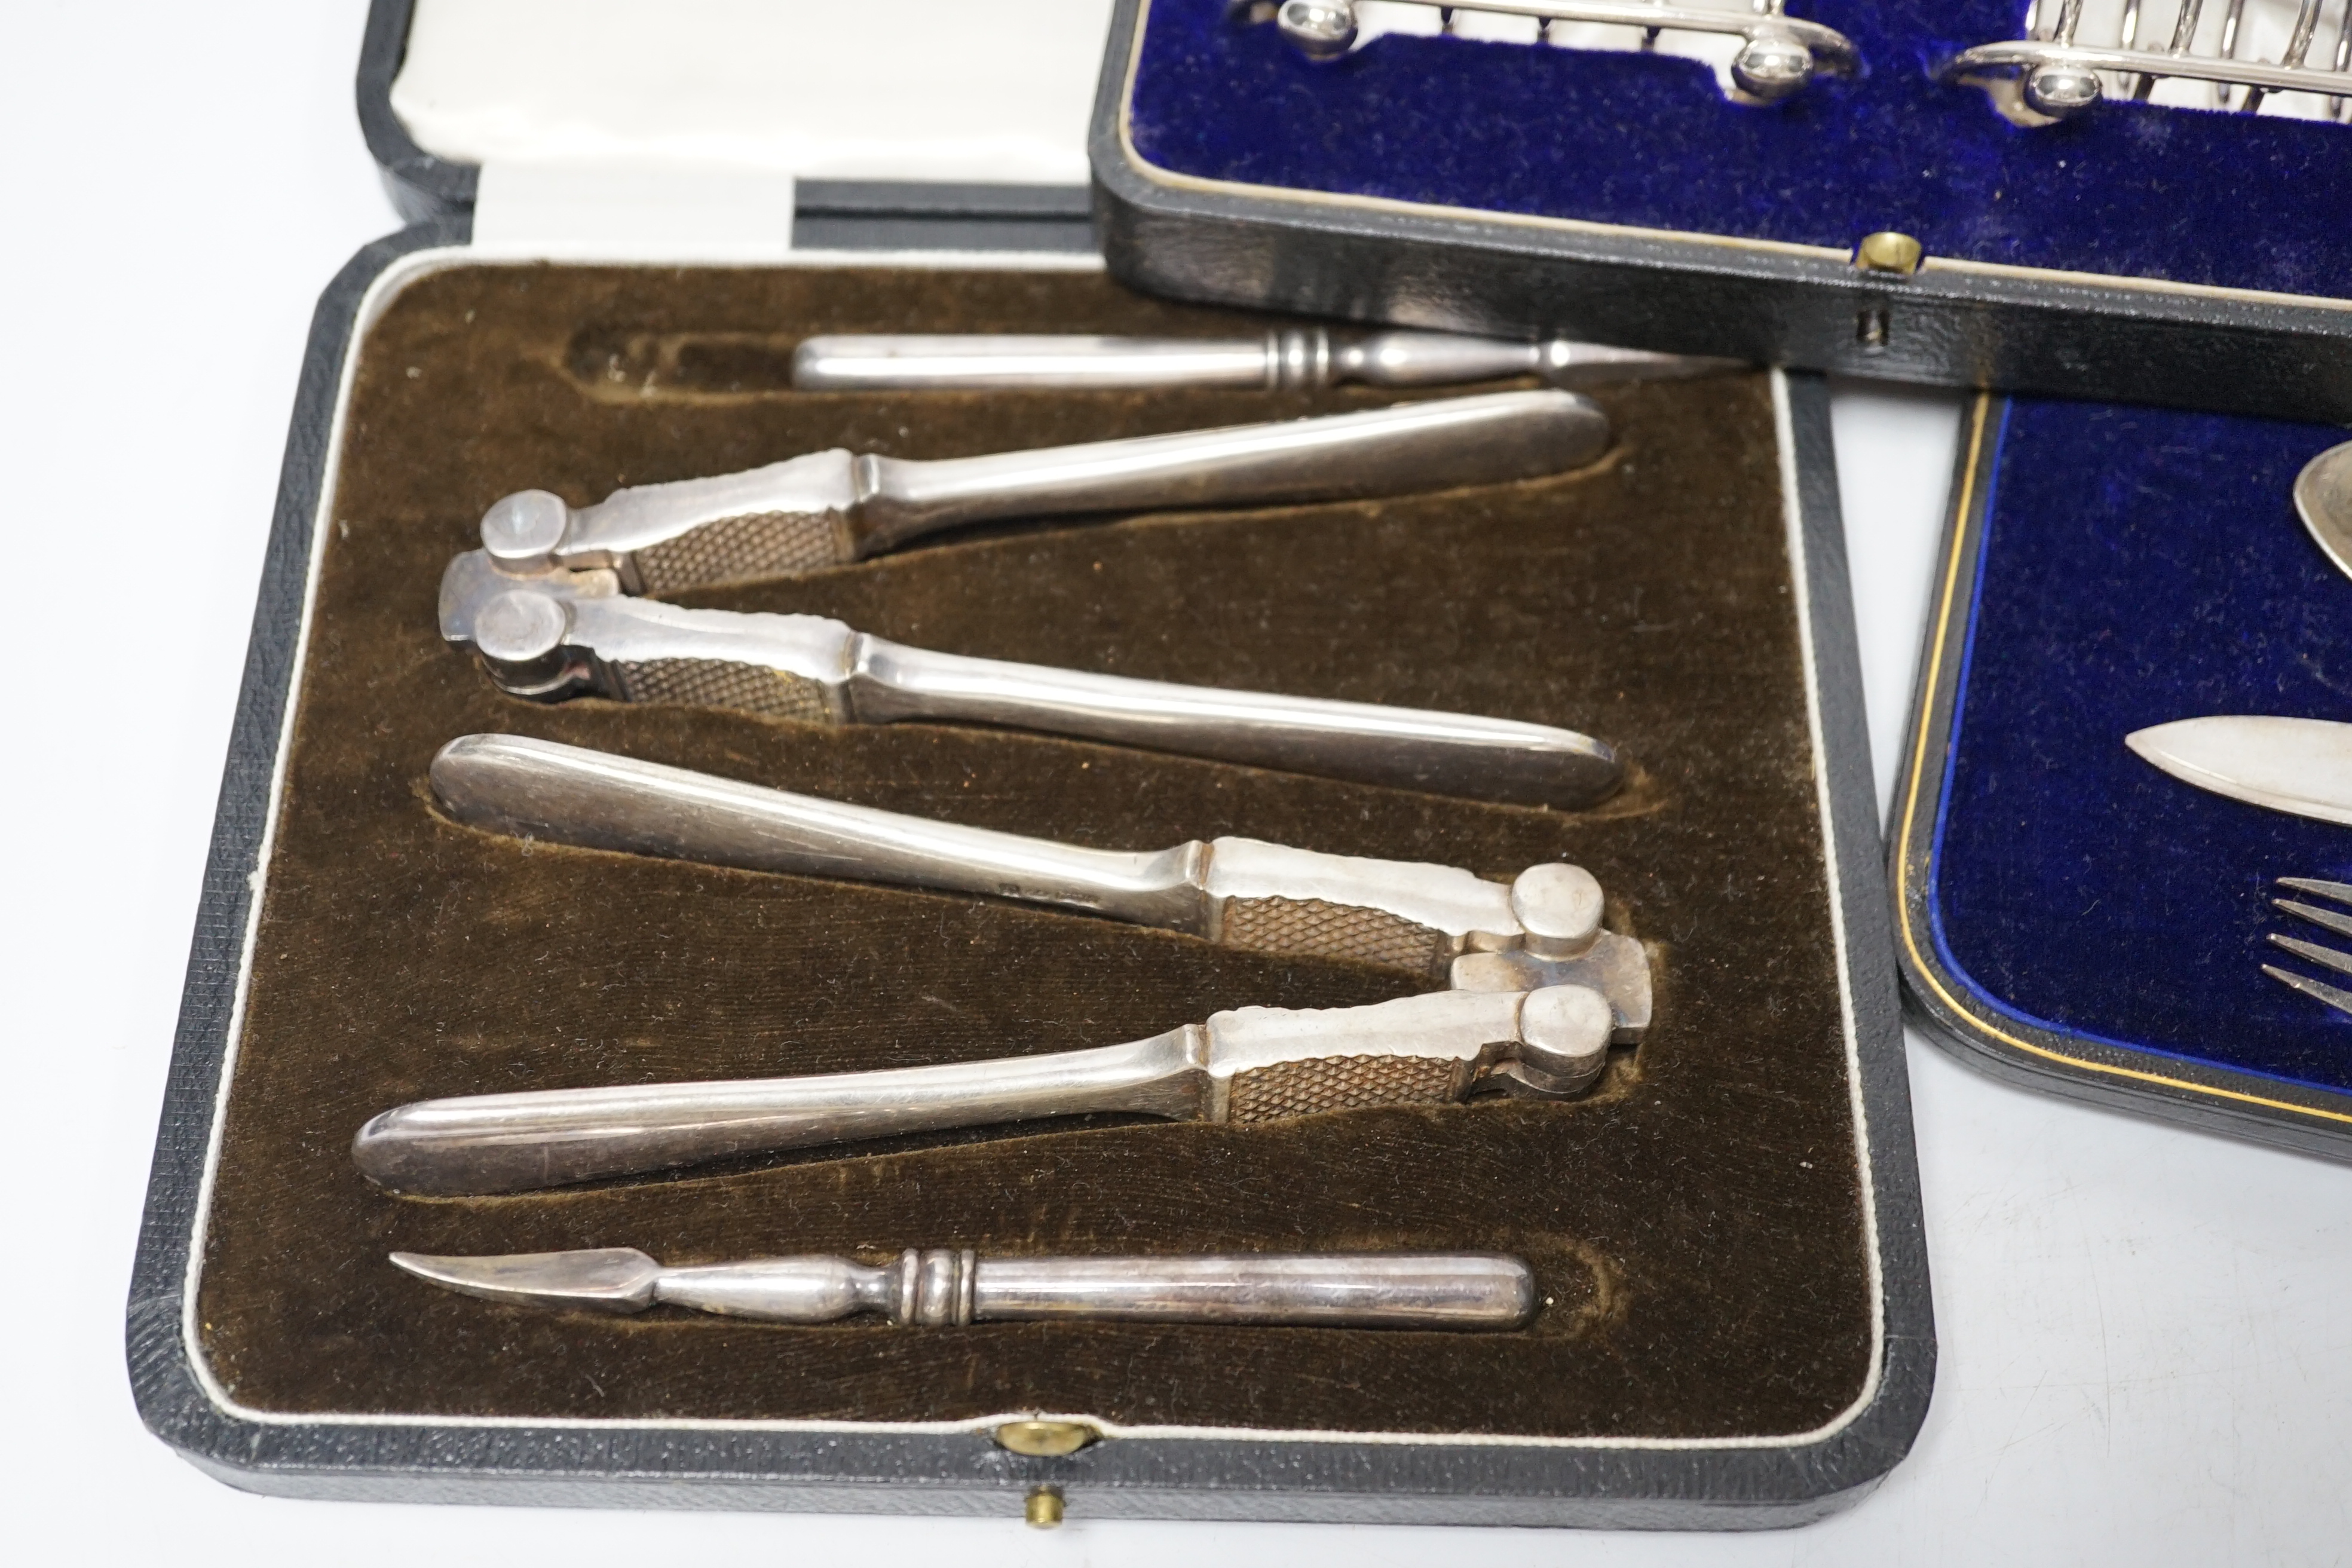 Thirteen assorted cased silver sets, including two sets of six handled tea knives, Leicester and Pudsey replica spoons, two matched sets of napkin rings, single spoon, christening trio, two sets of teaspoons, pair of toa